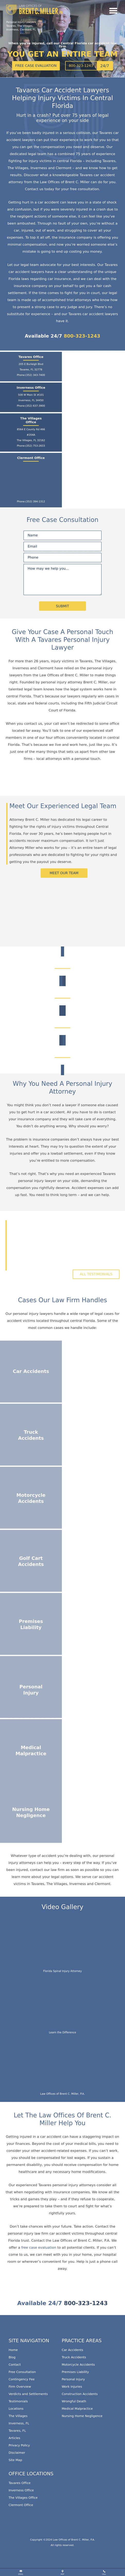 Law Offices of Brent C. Miller, P.A. - The Villages FL Lawyers